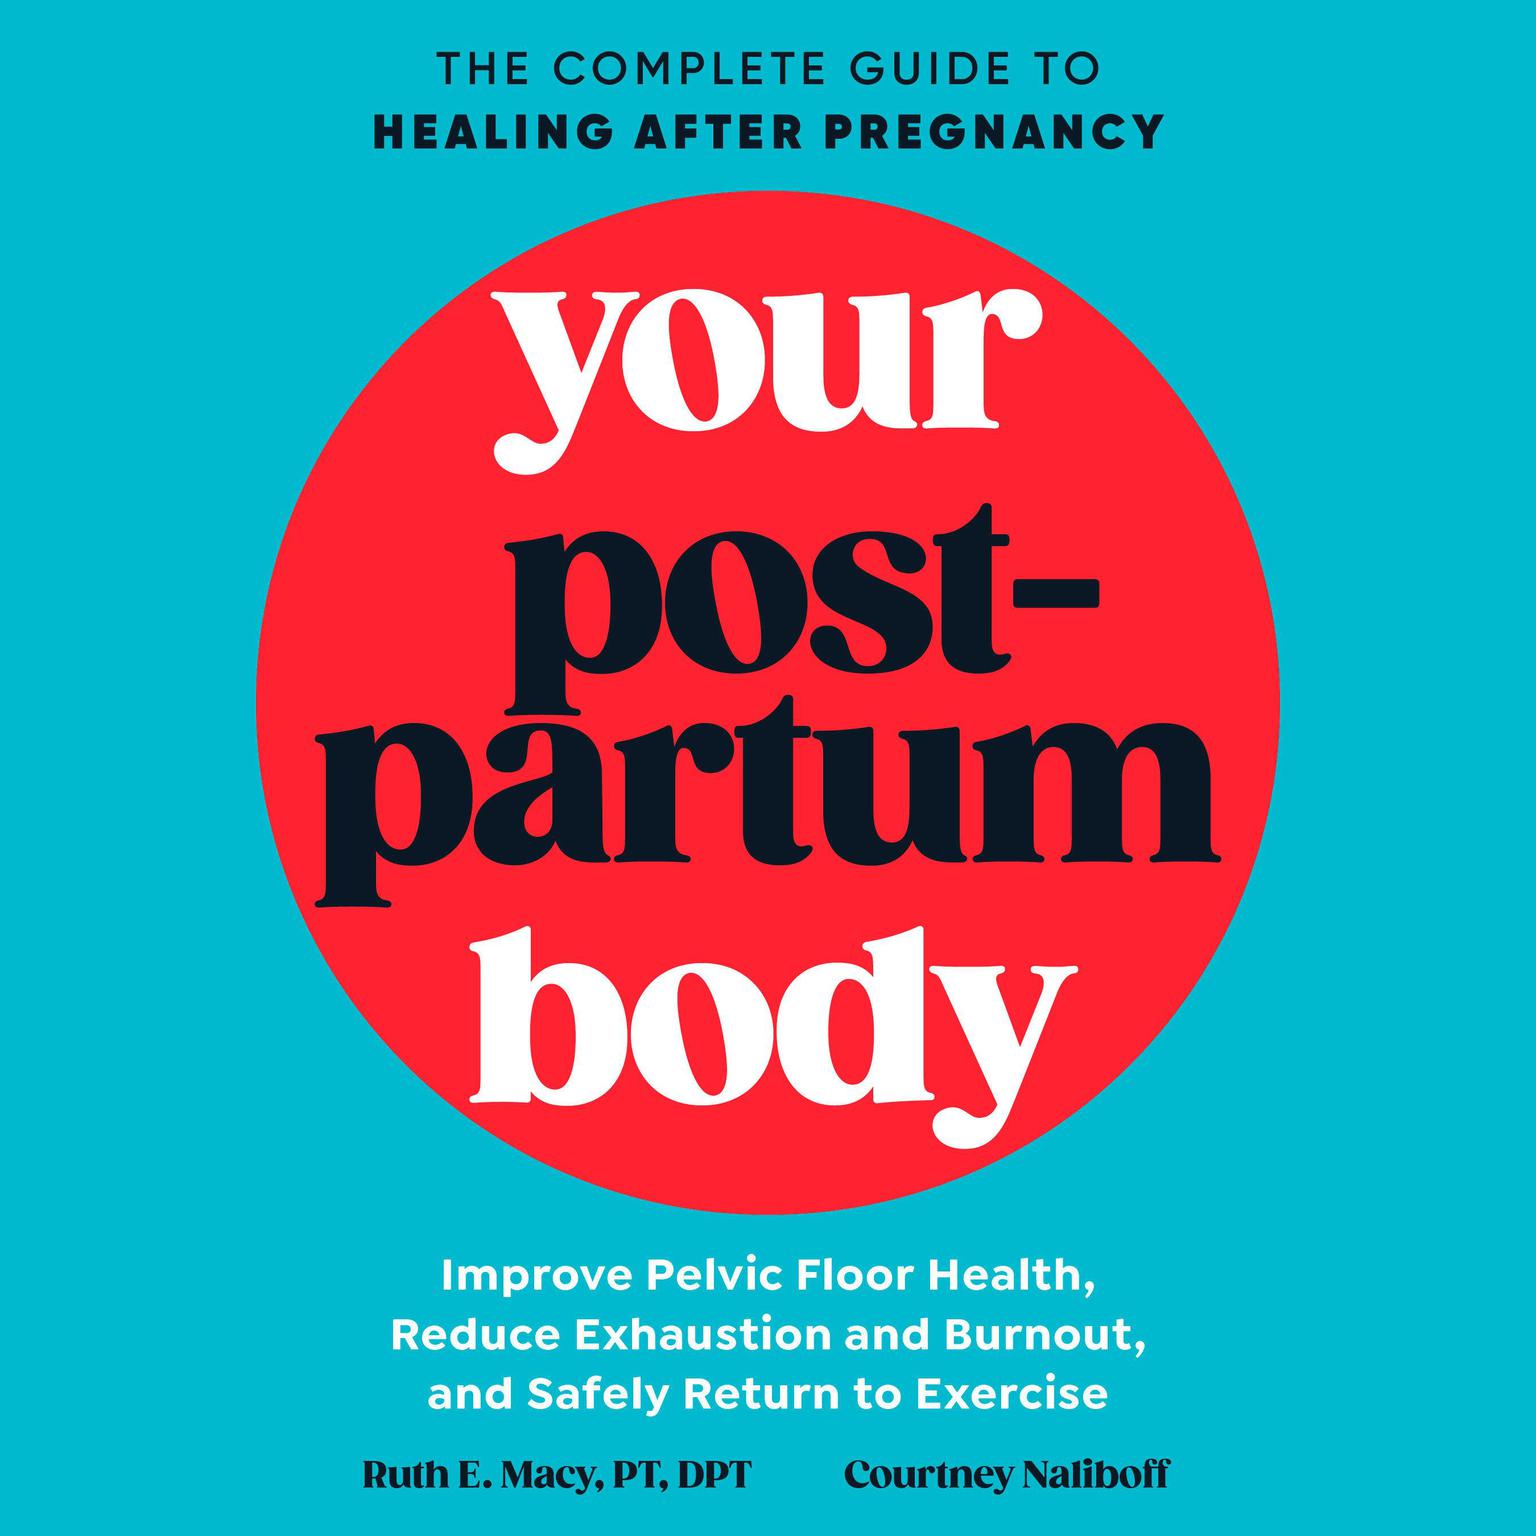 Your Postpartum Body: The Complete Guide to Healing After Pregnancy Audiobook, by Courtney Naliboff